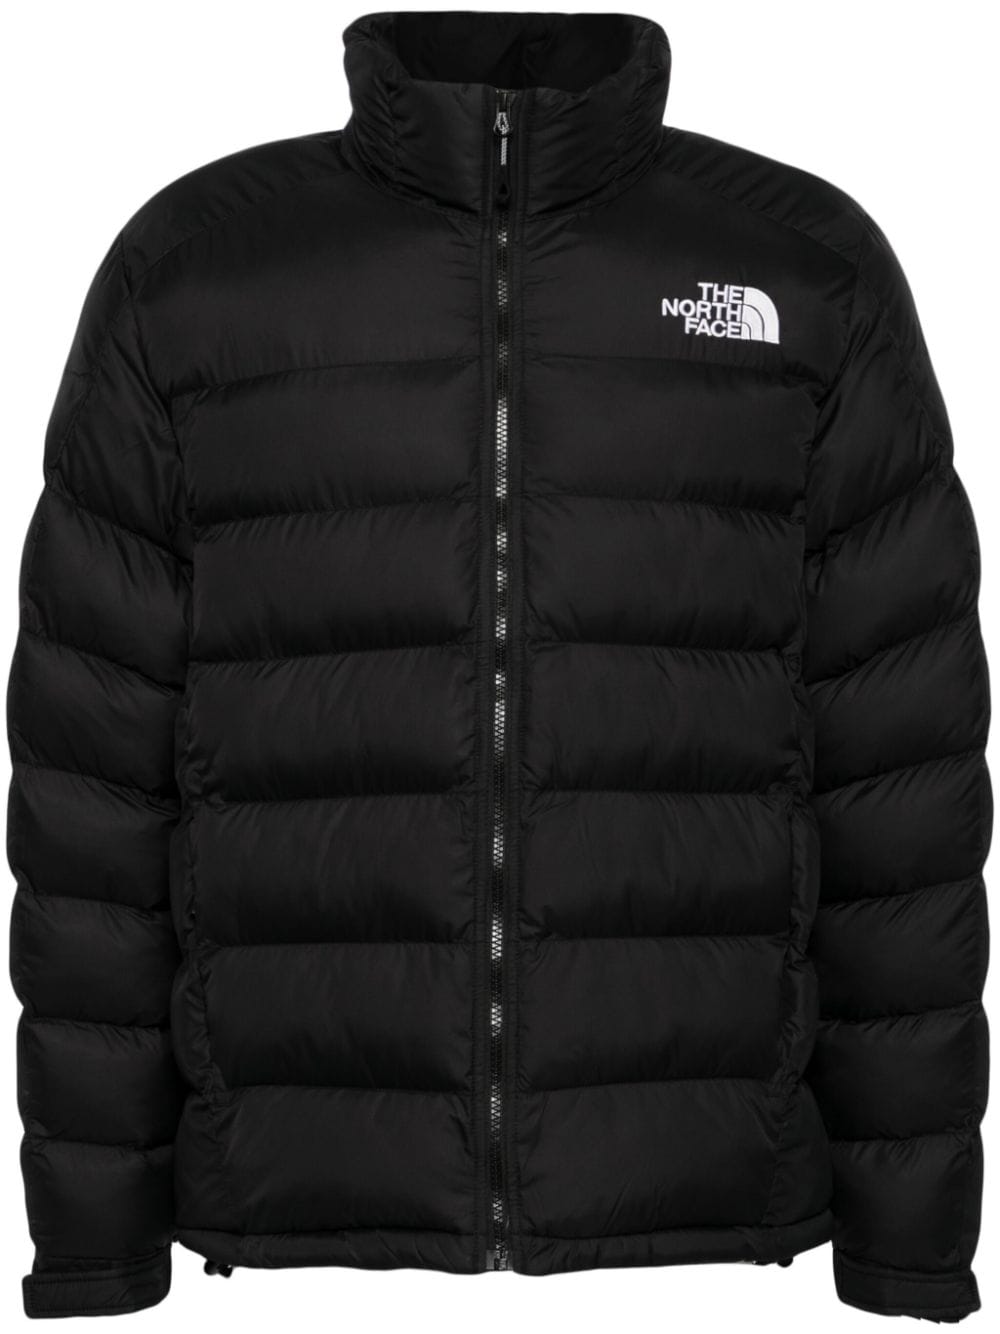 The North Face Rusta 2.0 puffer jacket - Black von The North Face